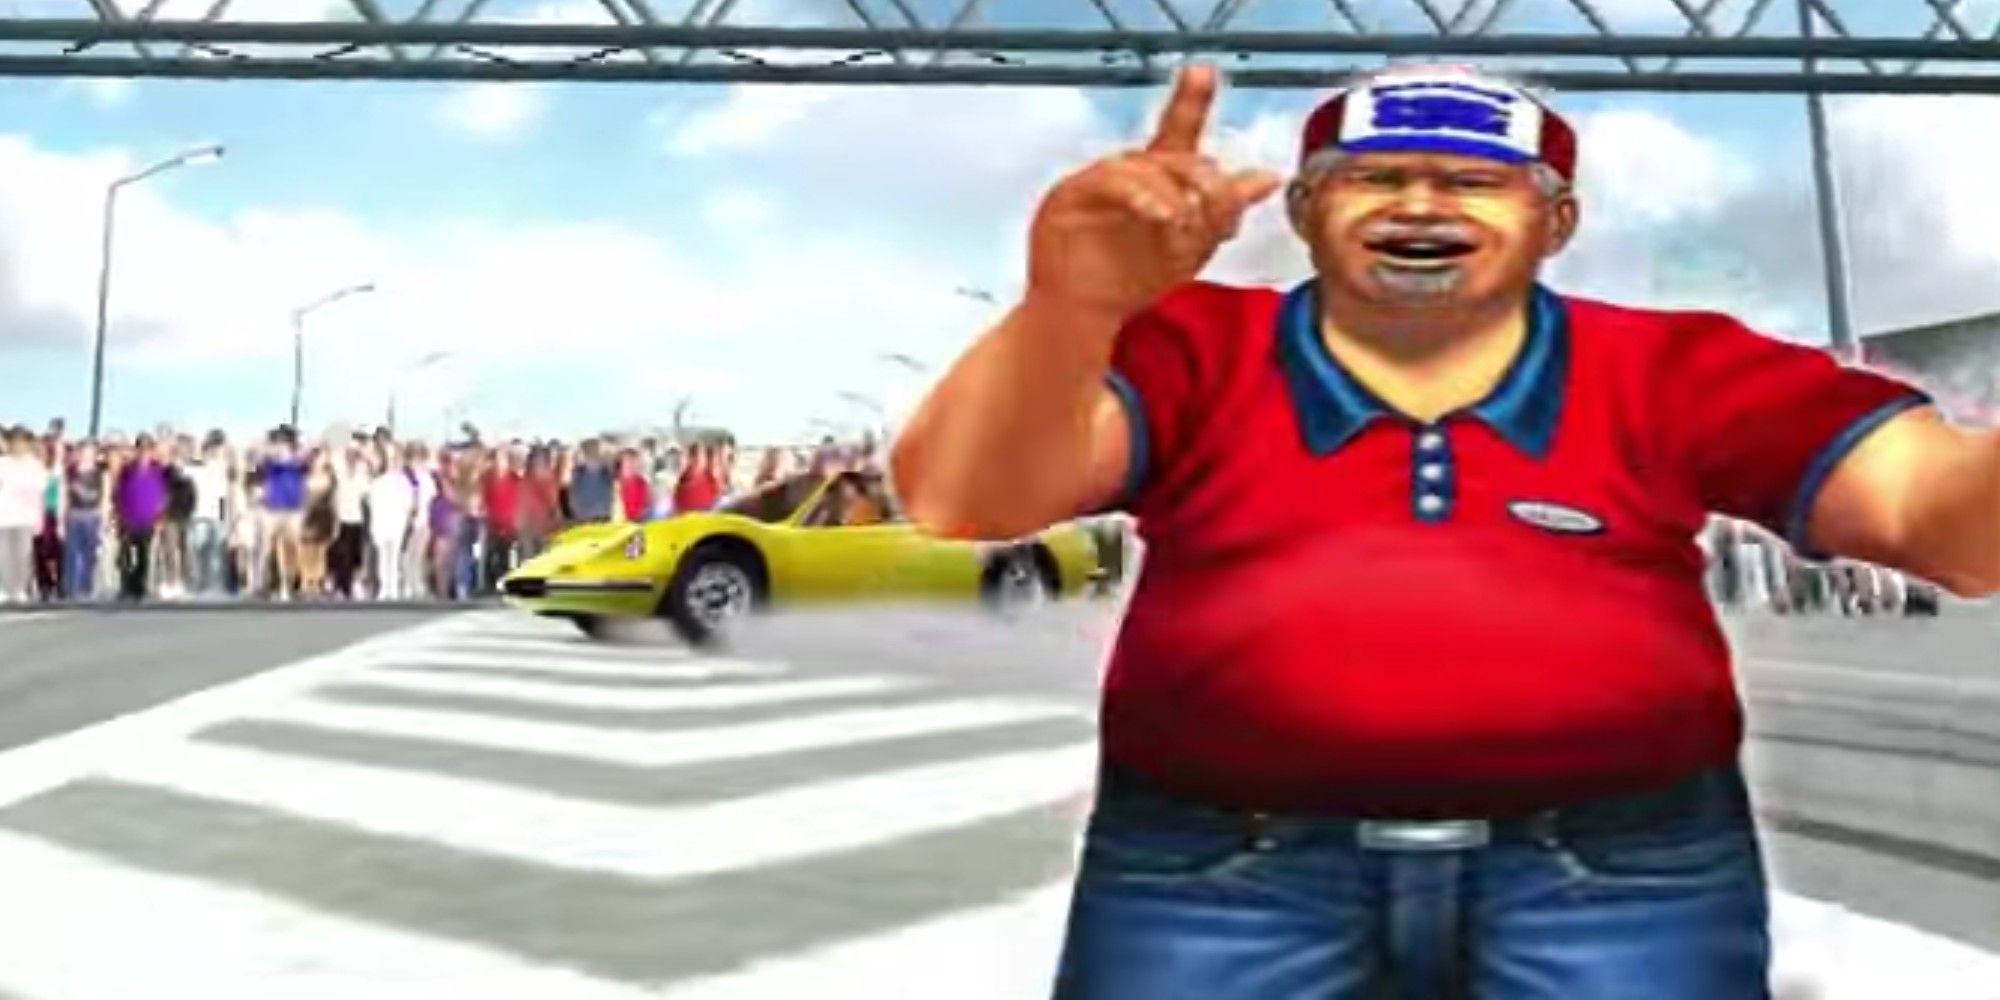 The Flag Guy from Outrun 2006 pointing upwards, with a yellow car and crowd in the background.